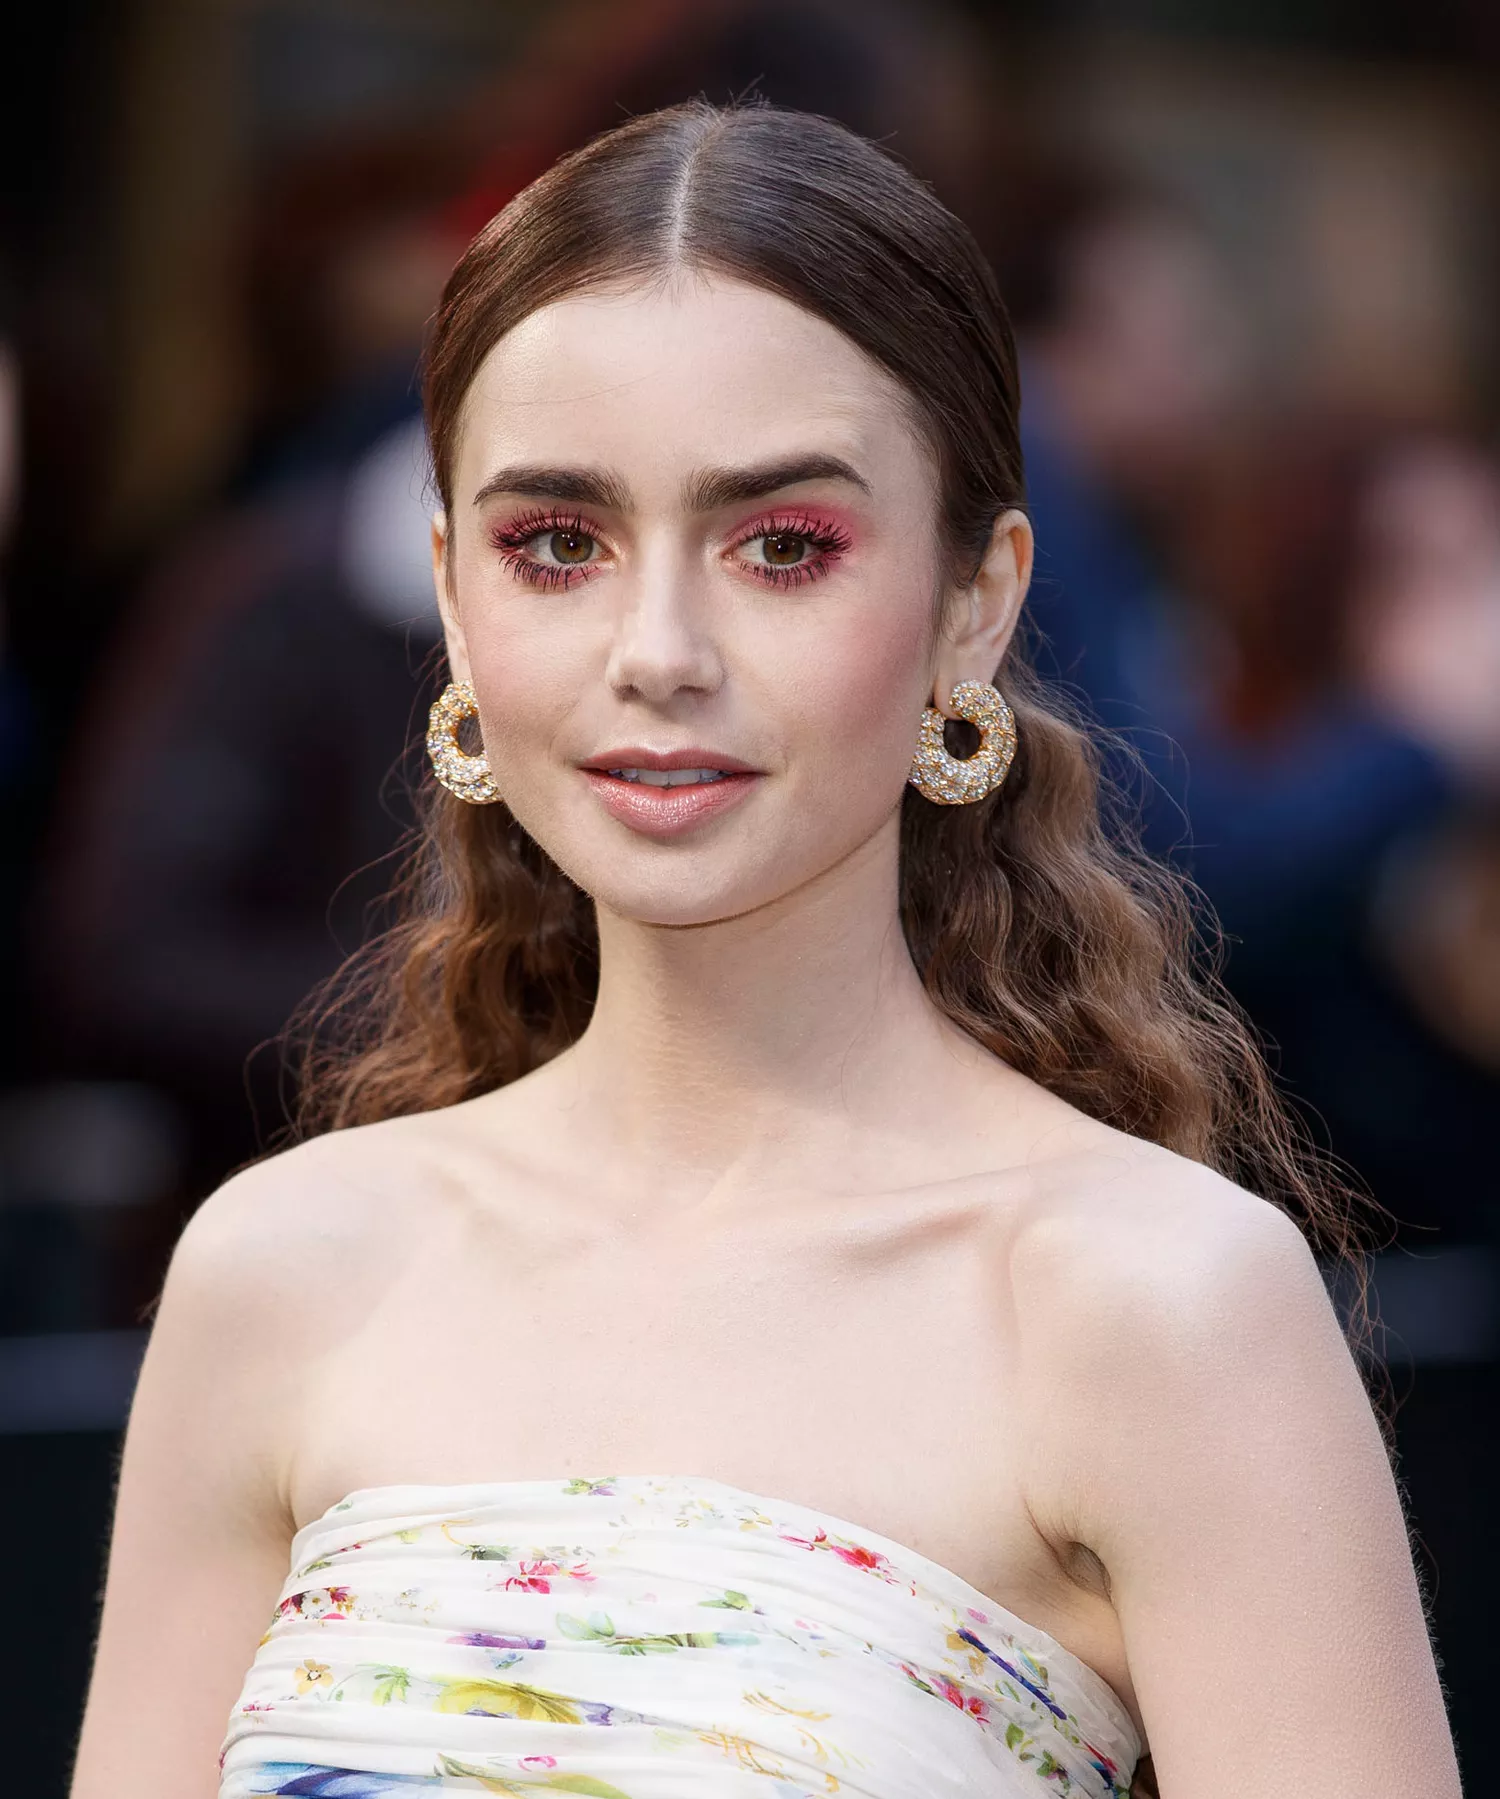 Lily Collins wearing blended pink eyeshadow